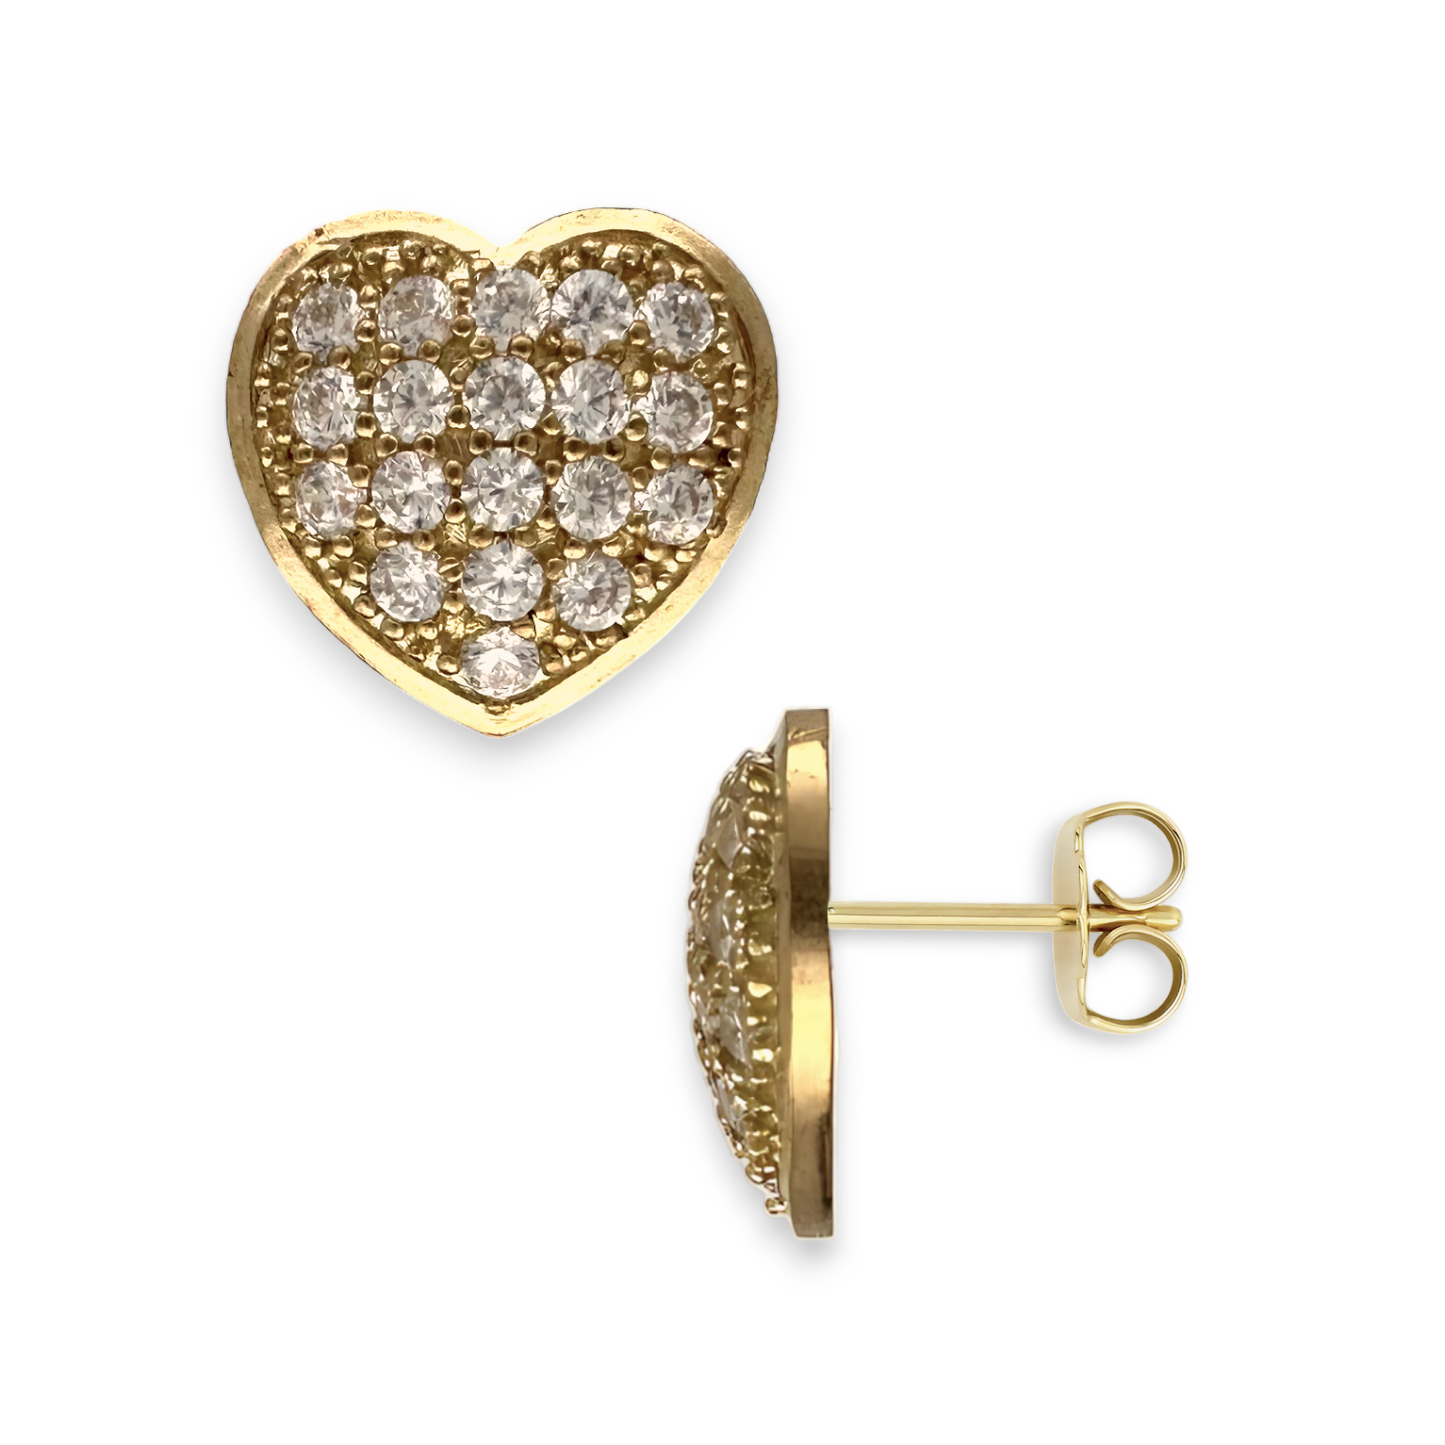 Yellow Gold CZ Round Cut Micro-Pave Heart Stud Earrings - 10k Yellow Gold